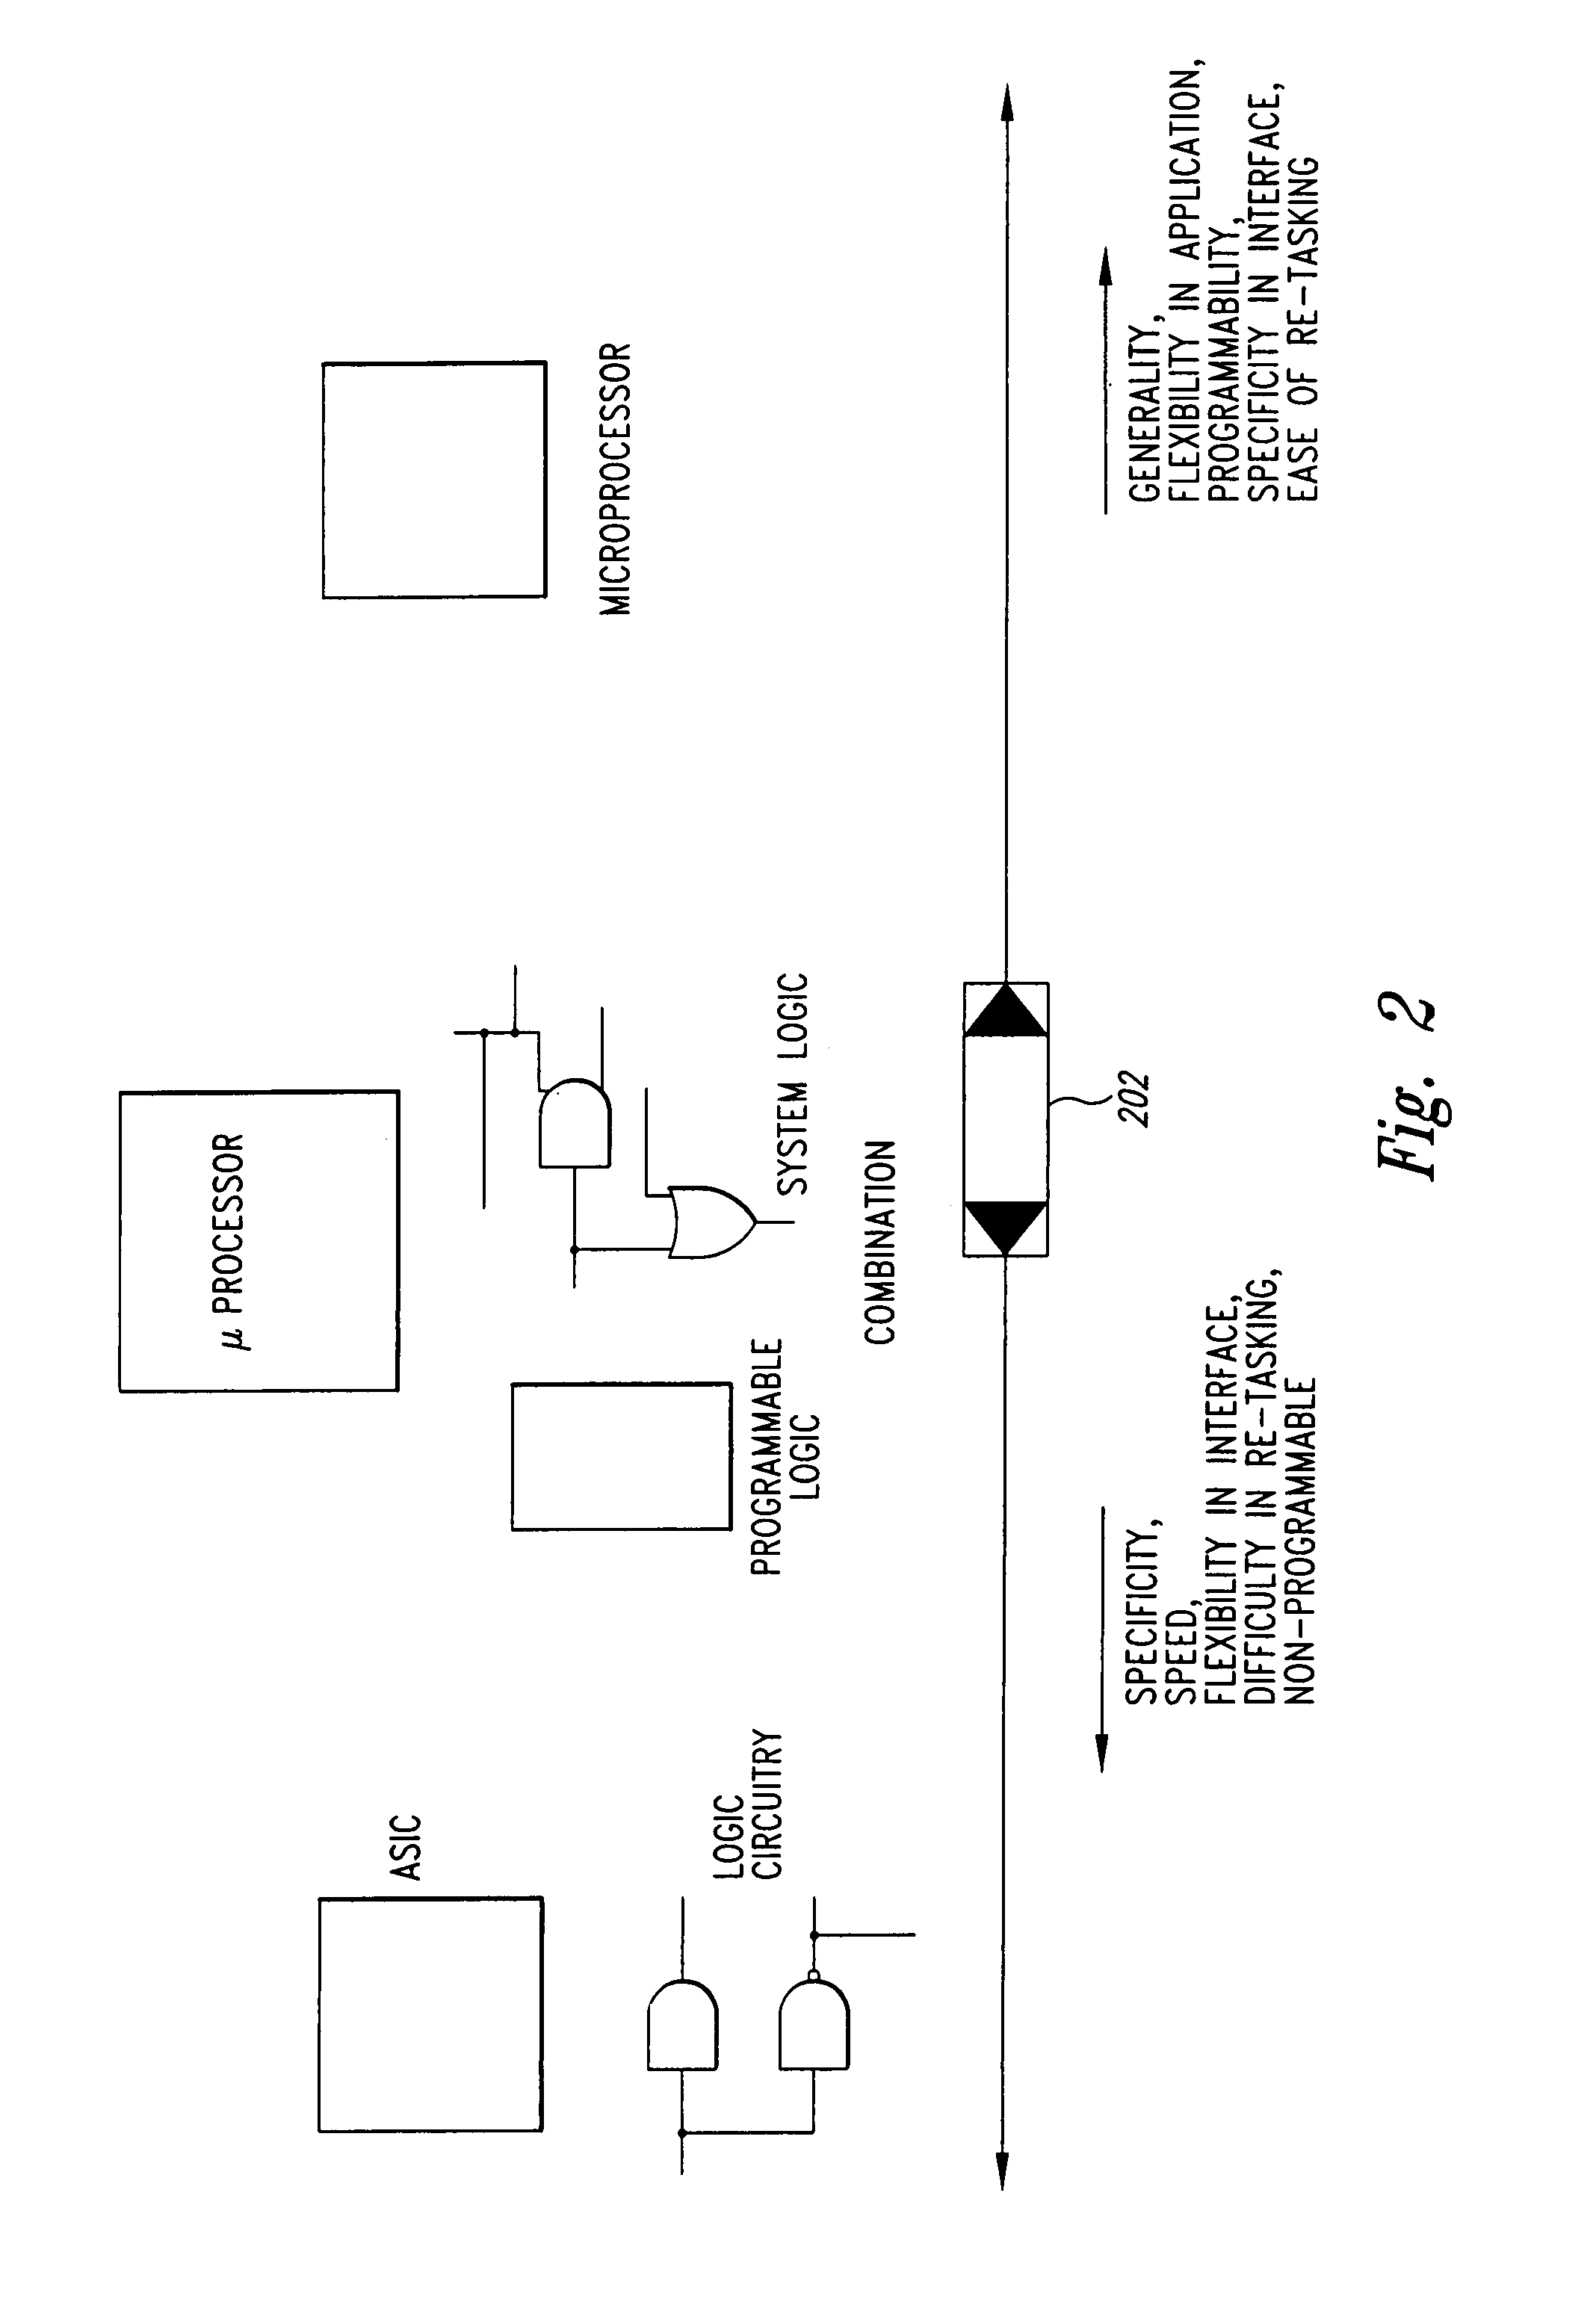 Integrated micro-controller and programmable device